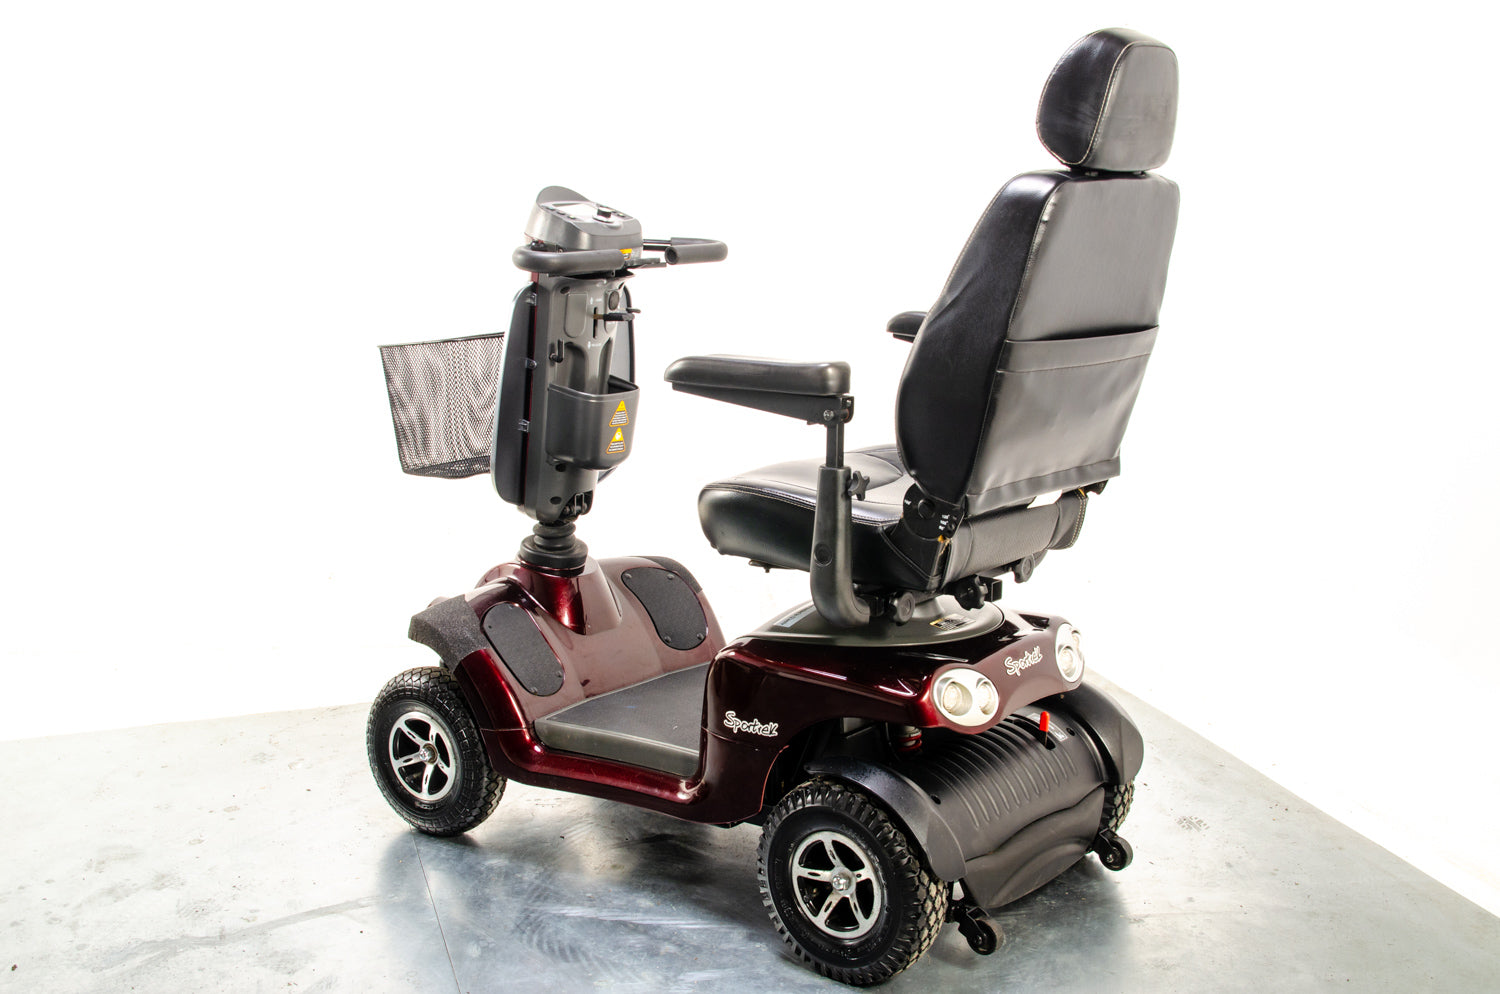 Excel Sportrek All-Terrain Off-Road Used Mobility Scooter 8mph Road Pneumatic Van Os Midsize Pavement 13369